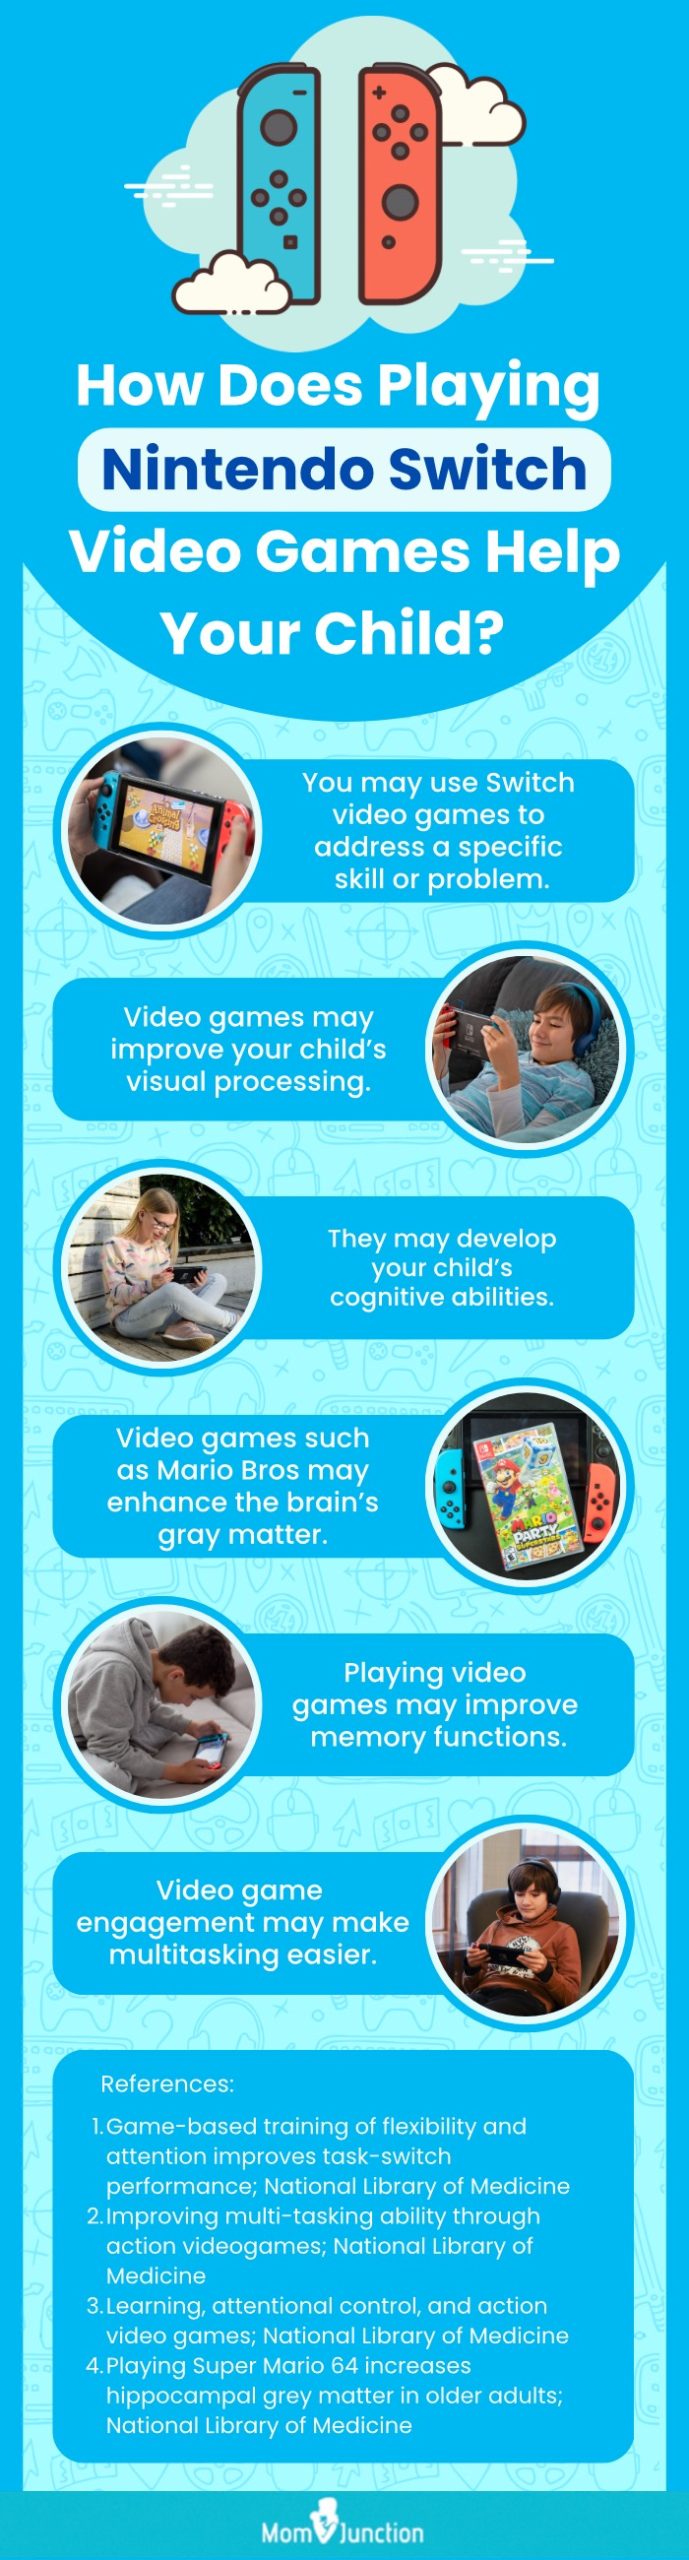 How Does Playing Nintendo Switch Video Games Help Your Child (infographic)